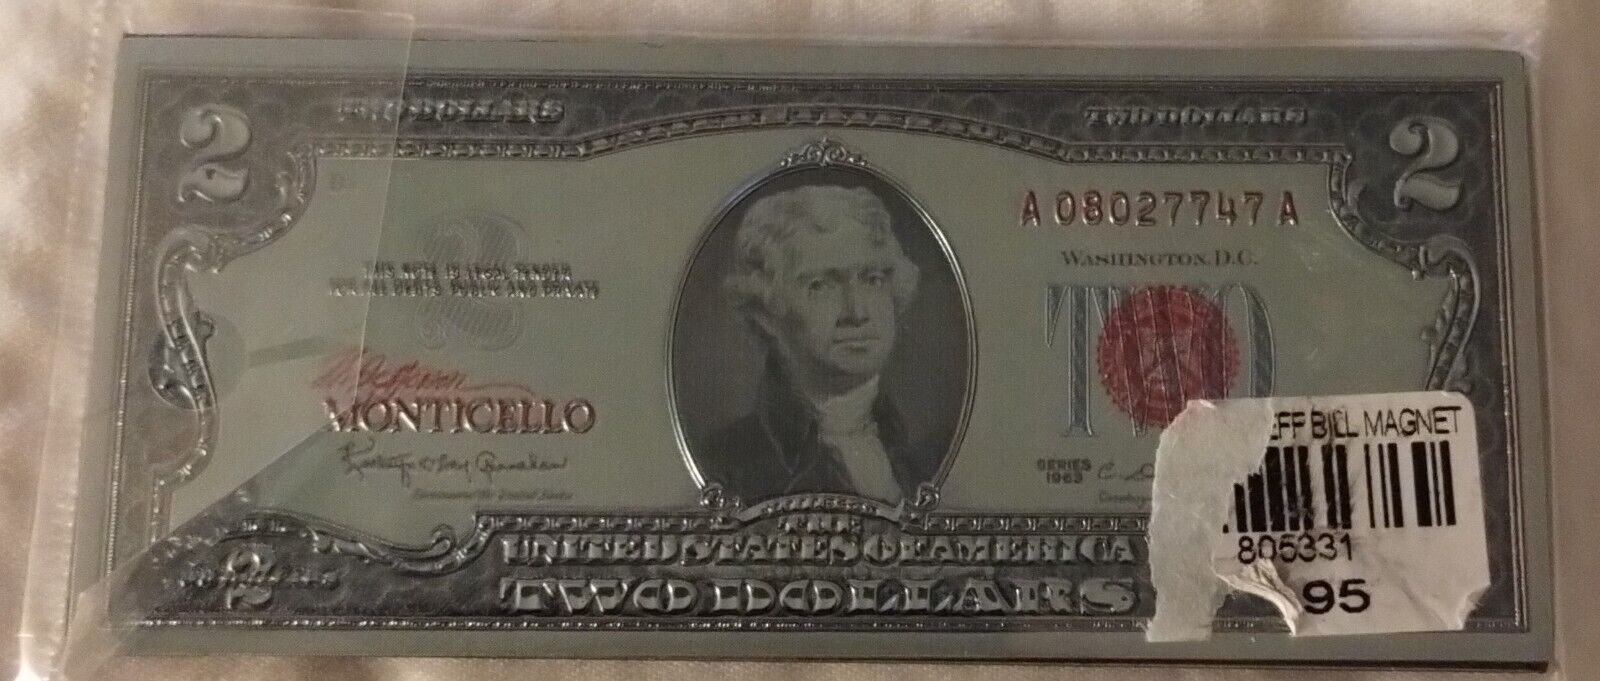 The Thomas Jefferson Monticello $2 Bill Magnet Awesome